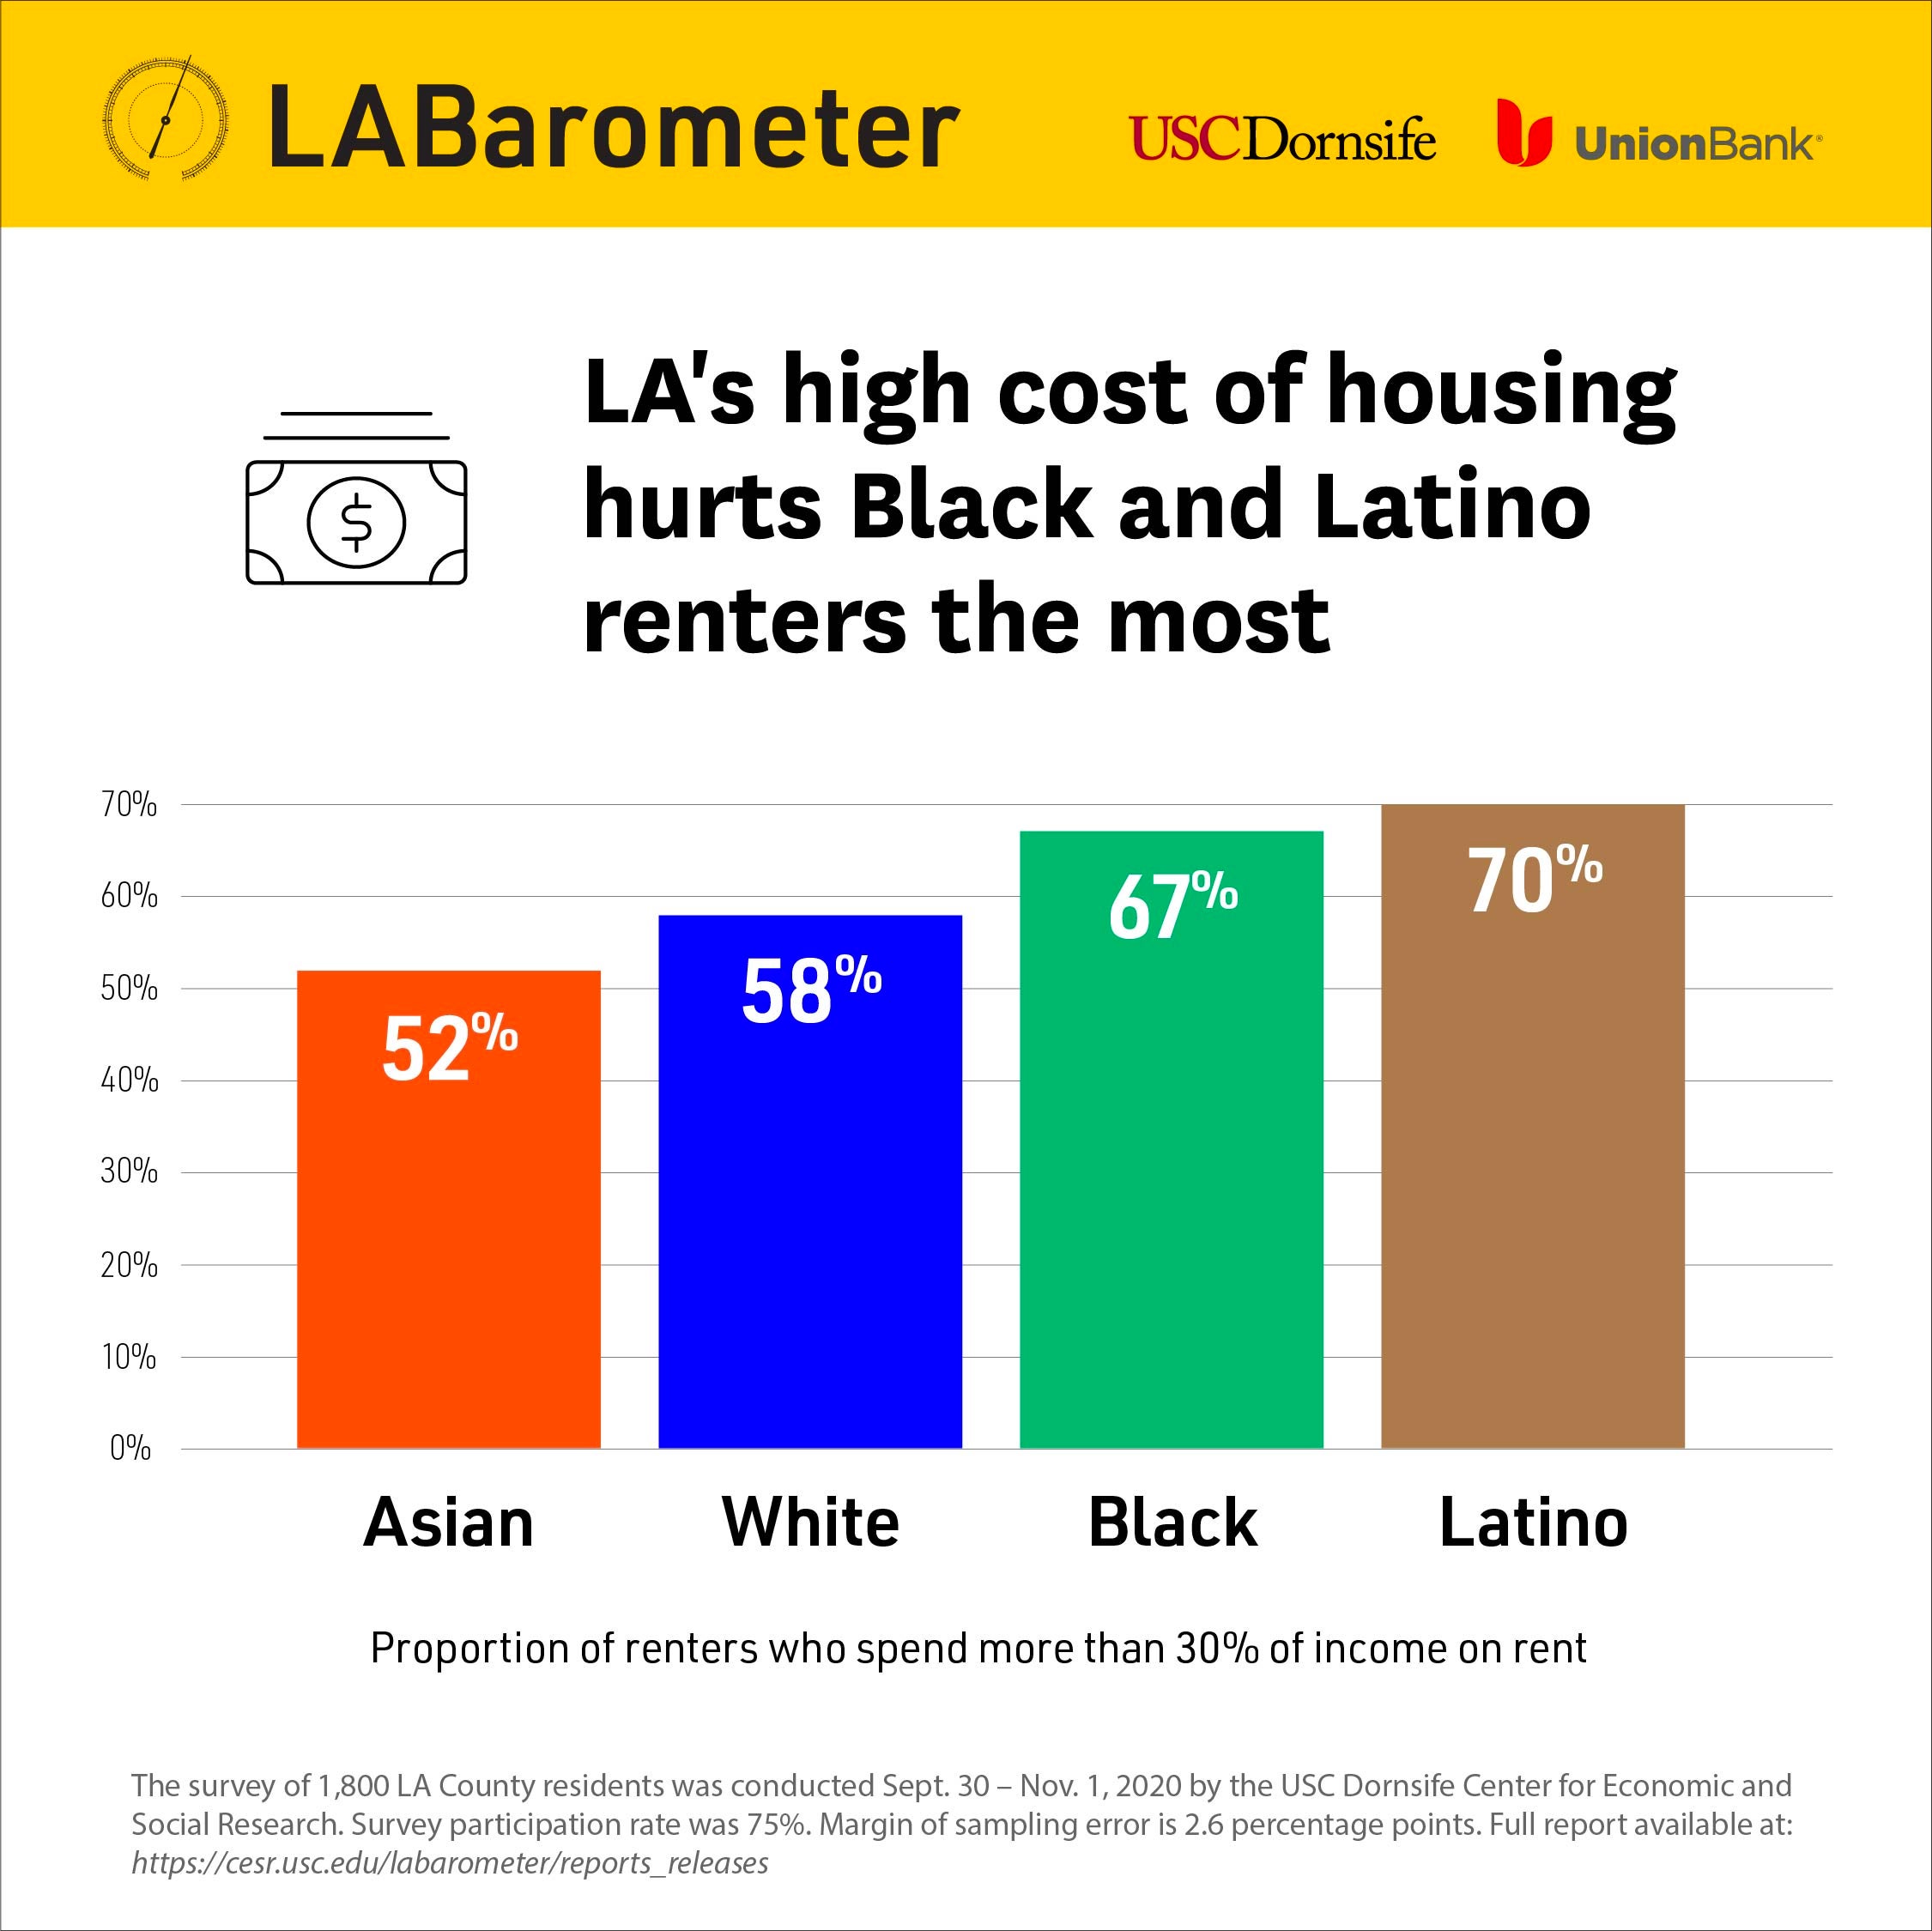 Bar graph shows percentage of L.A. County Asians (52%), whites (58%), Blacks (67%) and Latinos (70%) who spend more than 30% of their income on housing.